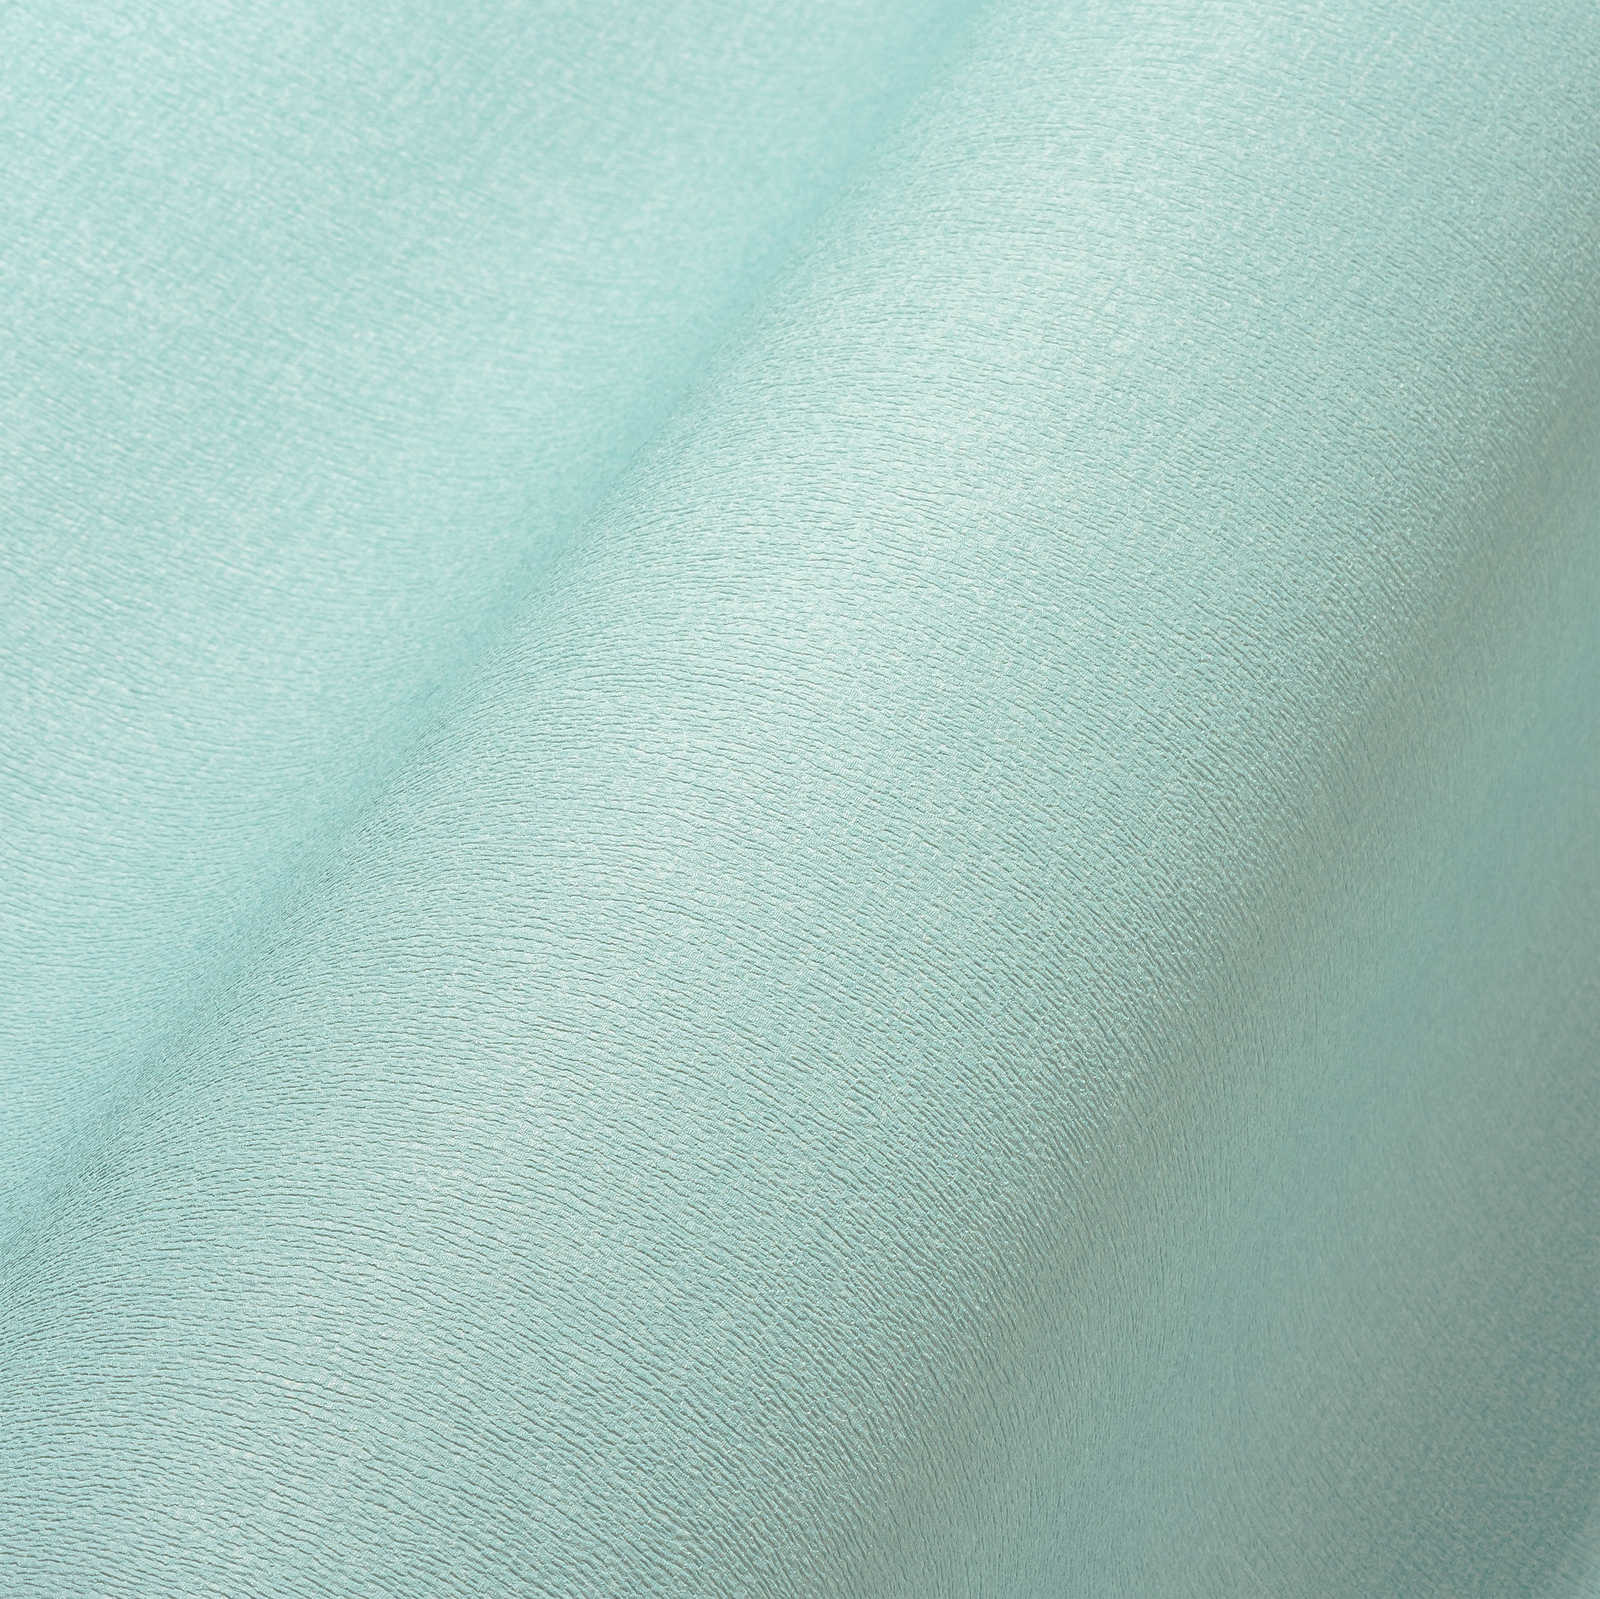             Plain non-woven wallpaper in maritime look - turquoise
        